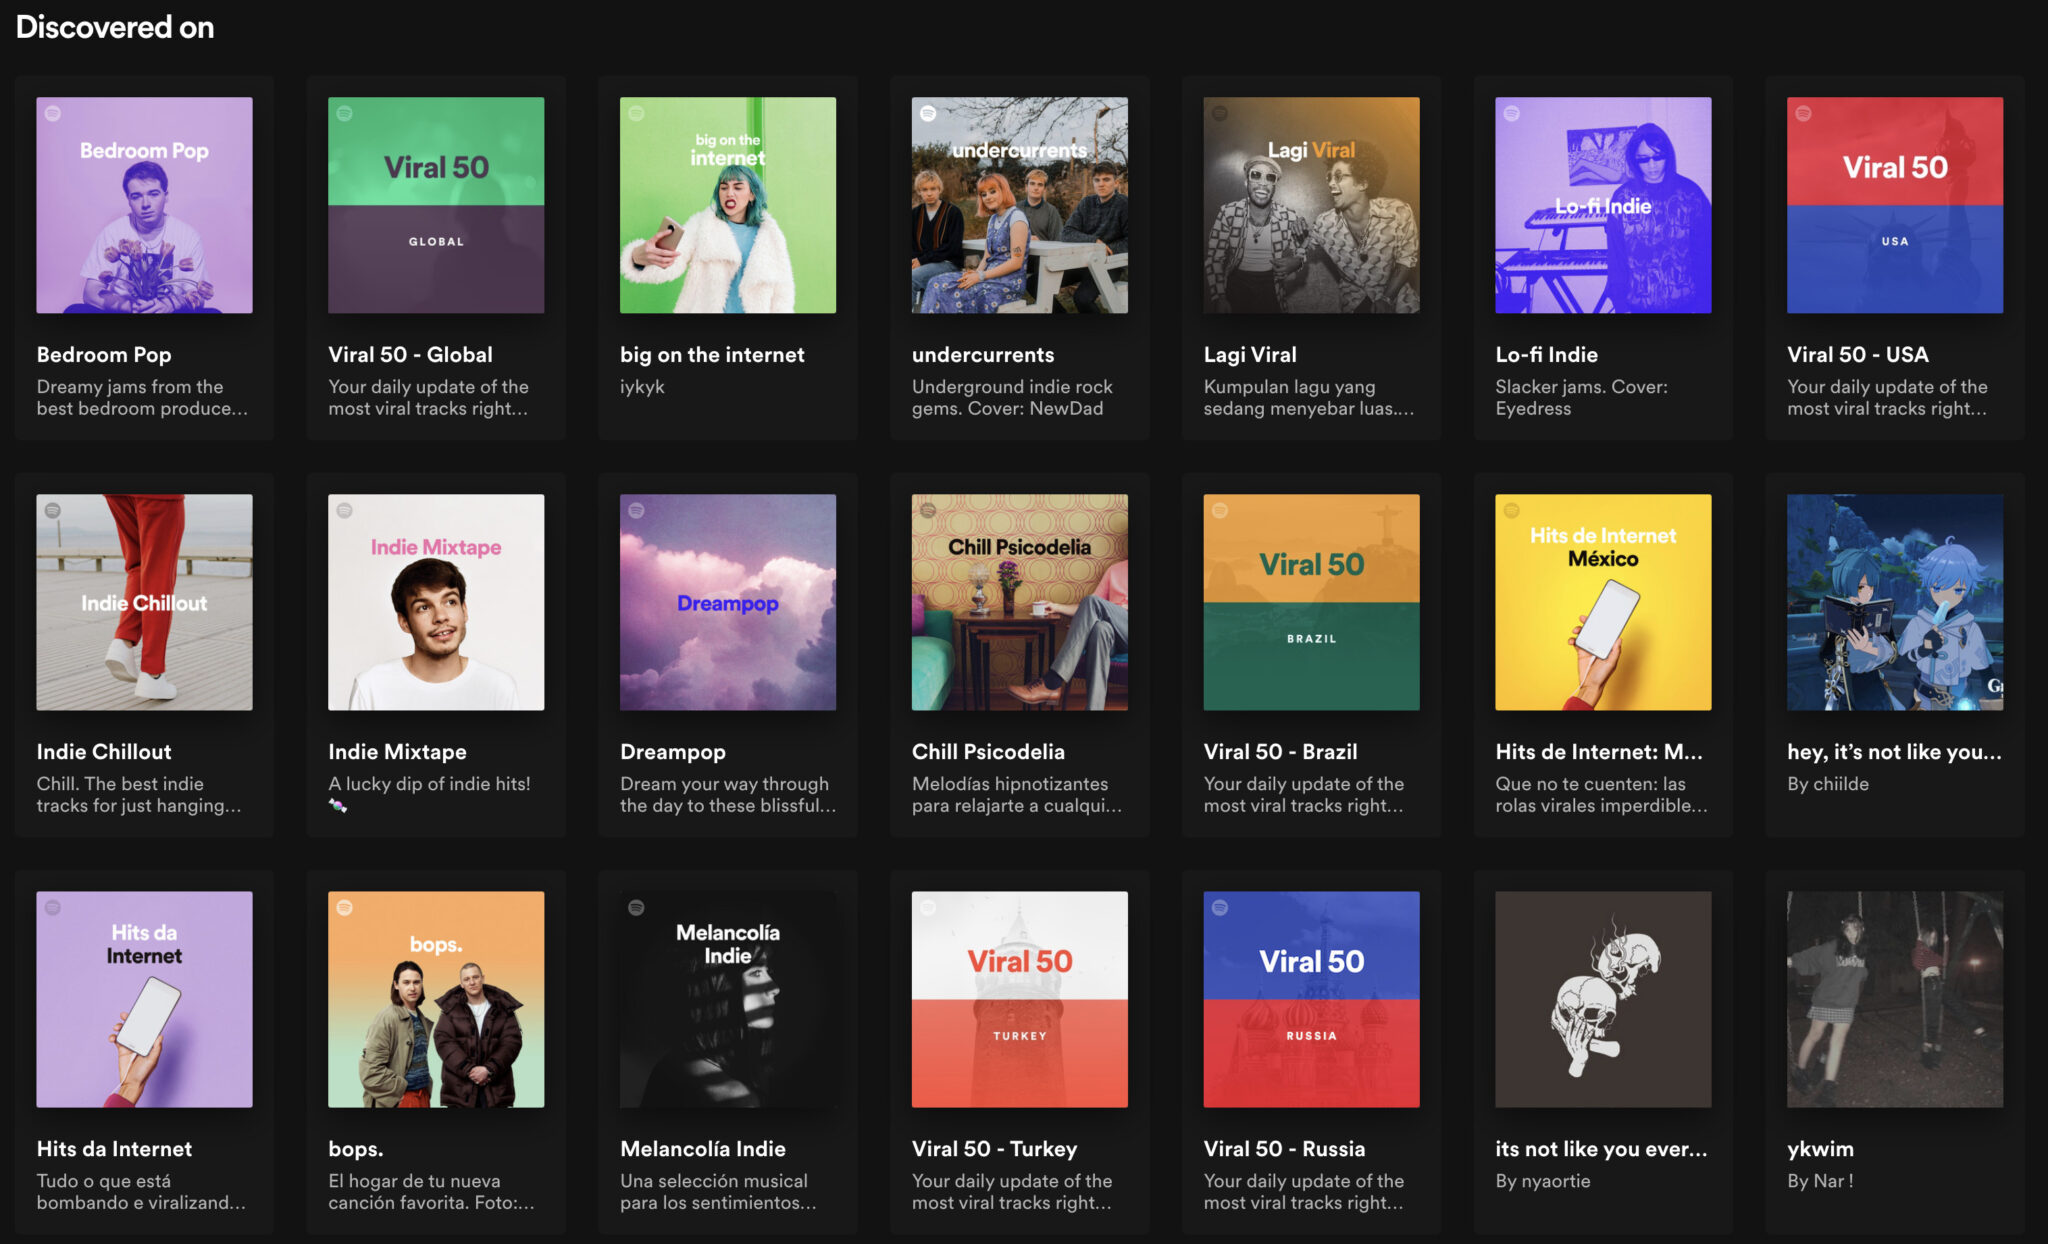 how to claim a spotify artist page